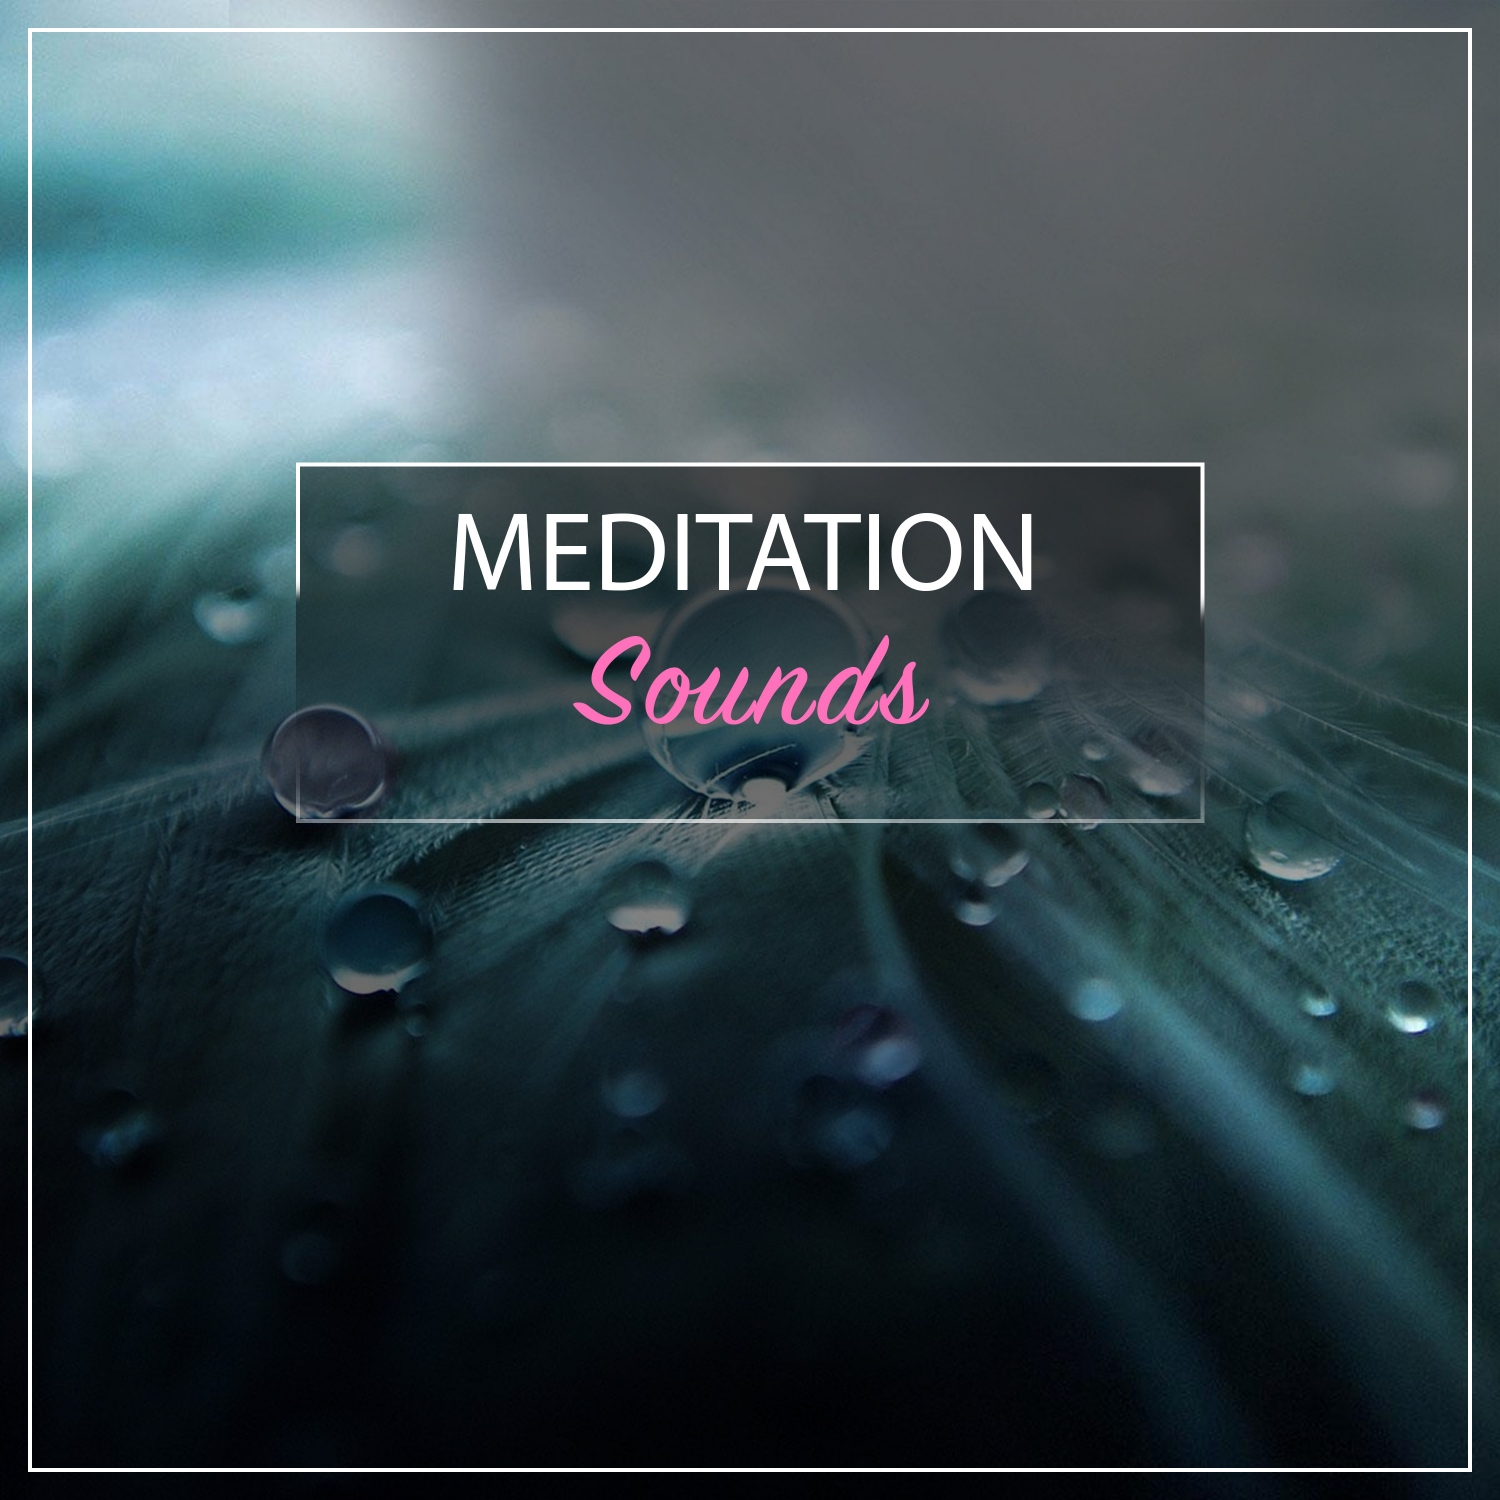 12 Meditative Relaxation Sounds - Natural and Organic Meditation Sounds